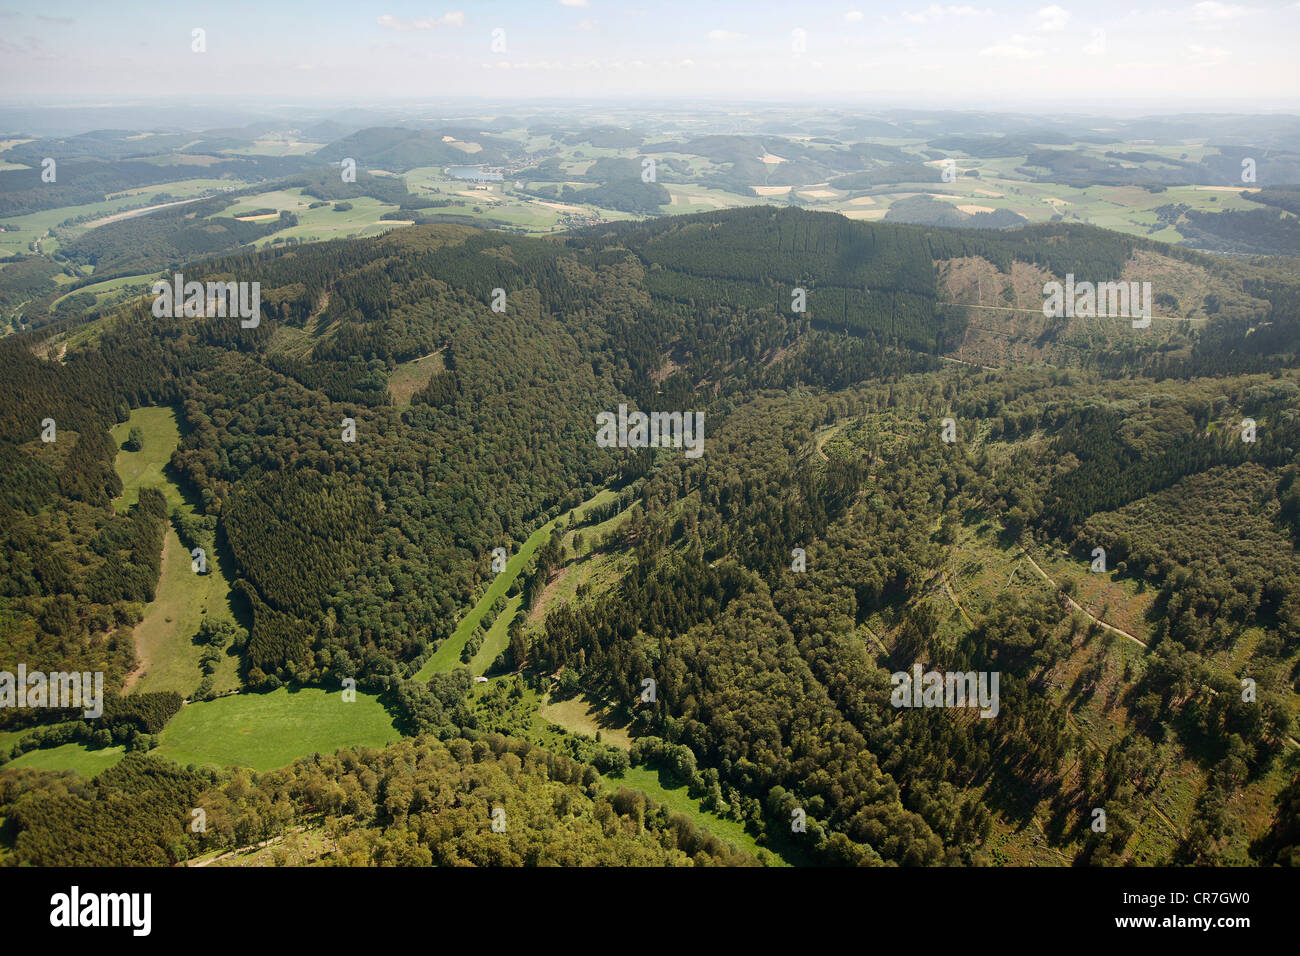 Aerial view, Diemelsee Nature Park, national park, beech forests, UNESCO World Heritage Site, Willingen Upland, Sauerland Stock Photo